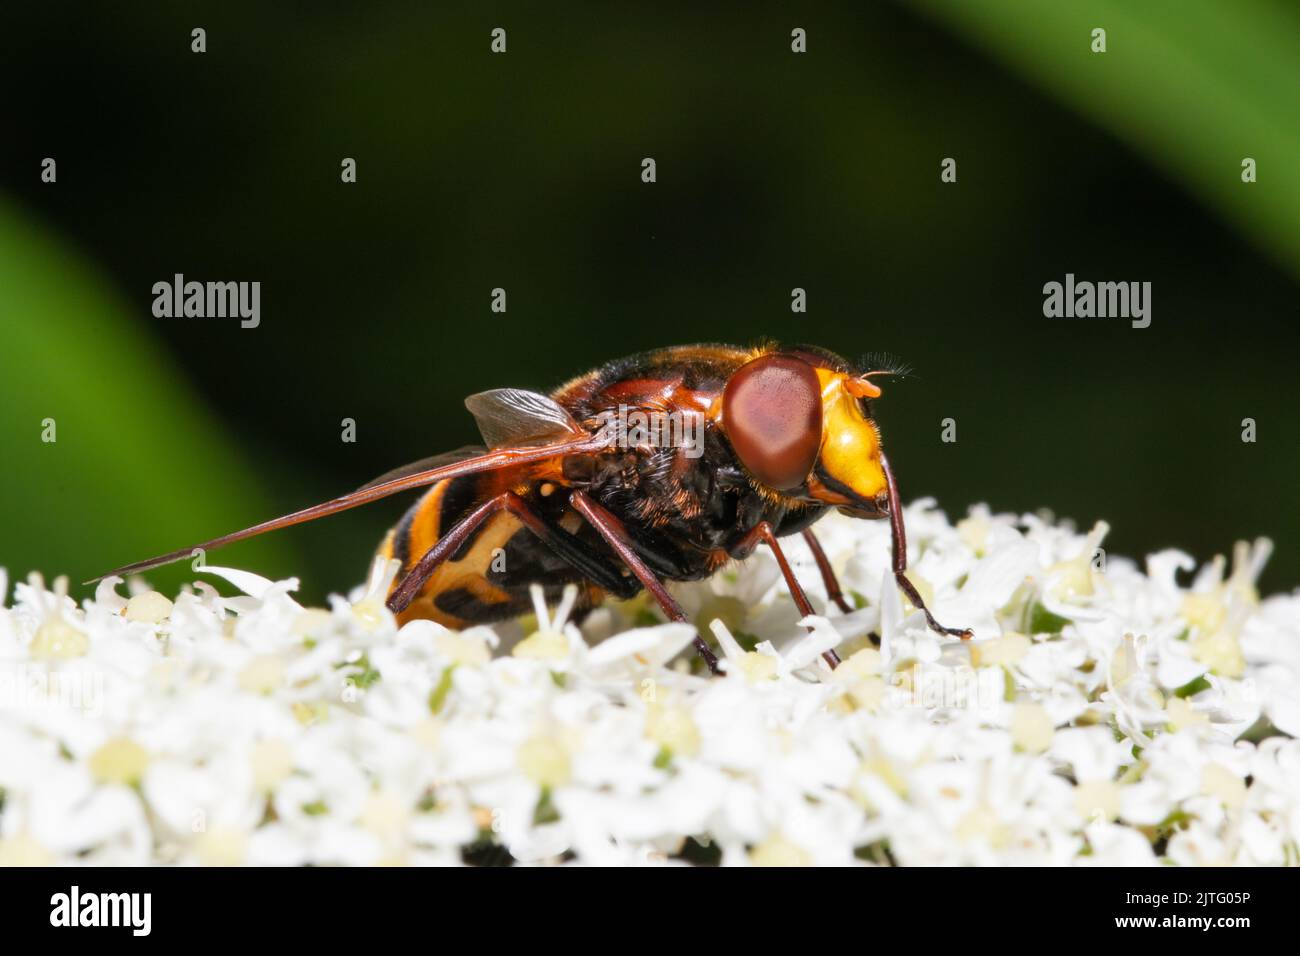 A hornet mimic hoverfly, Volucella zonaria, feeding on white flowers. Stock Photo